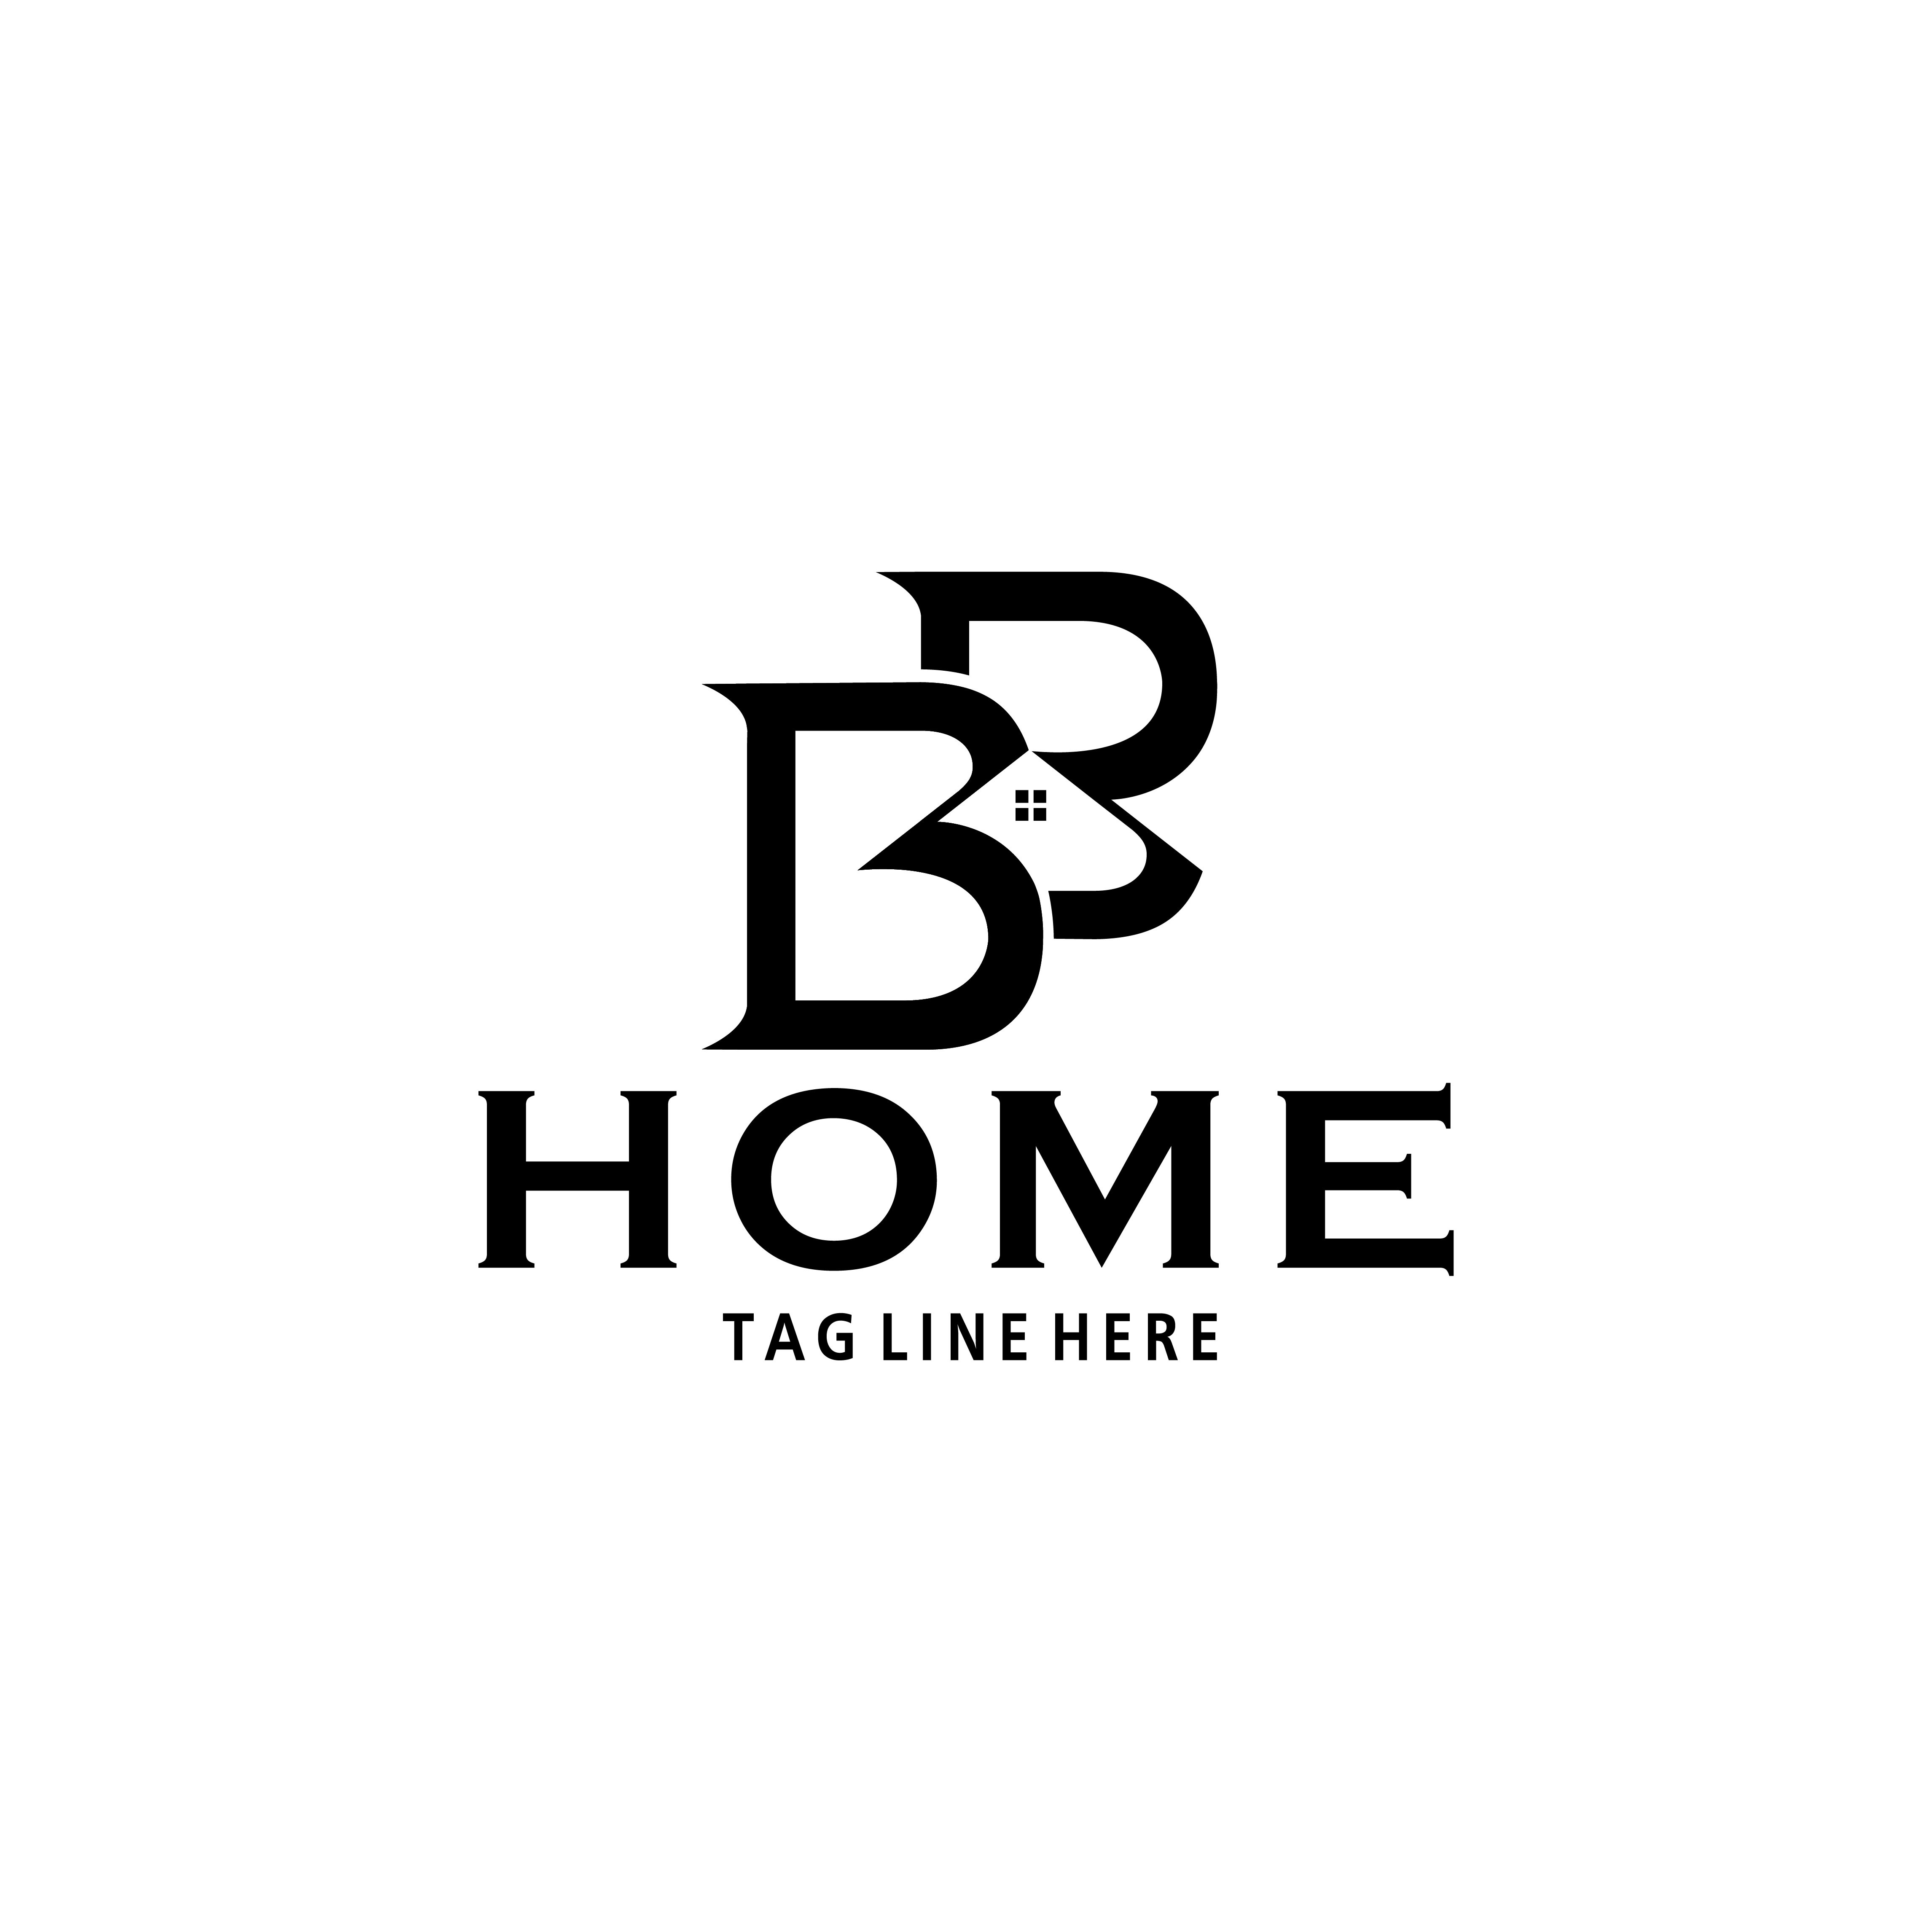 Real Estate Logo Design BB homes for initial "BB" preview image.